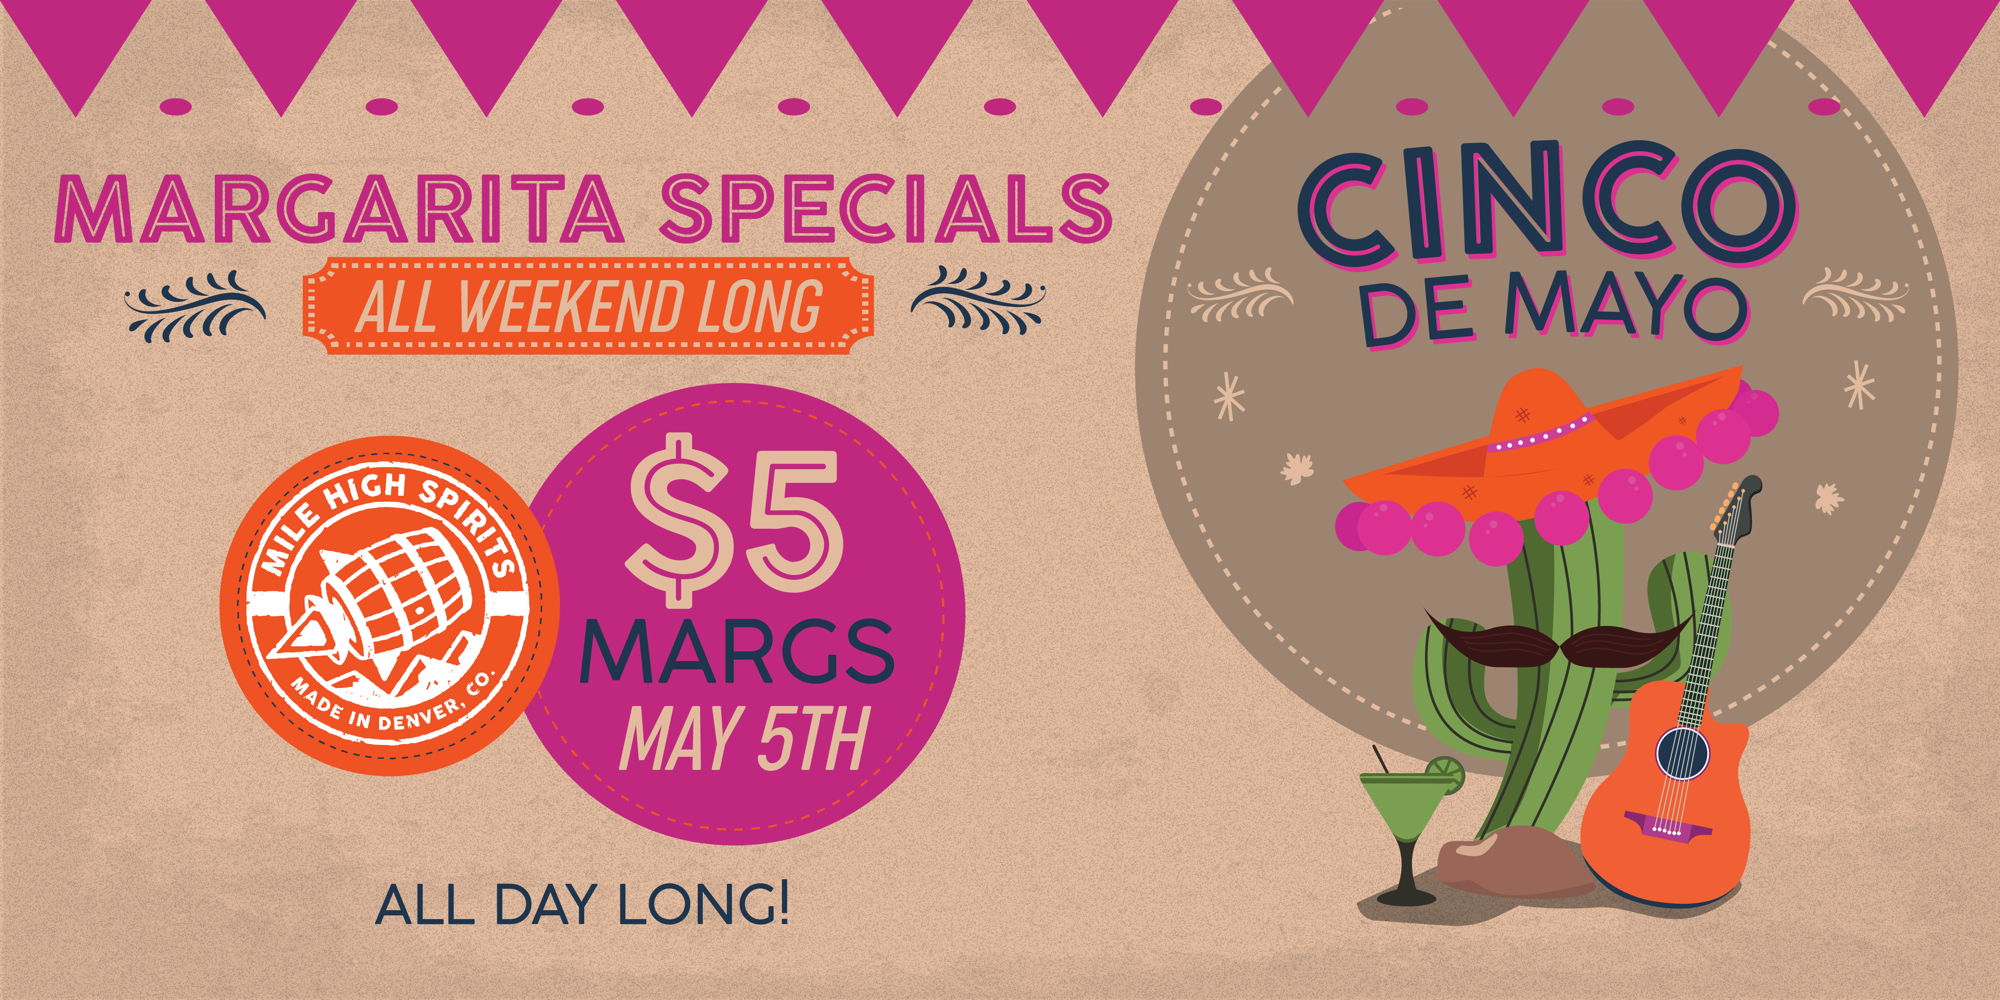 $5 Margs at Mile High Spirits - Cinco de Mayo promotional image